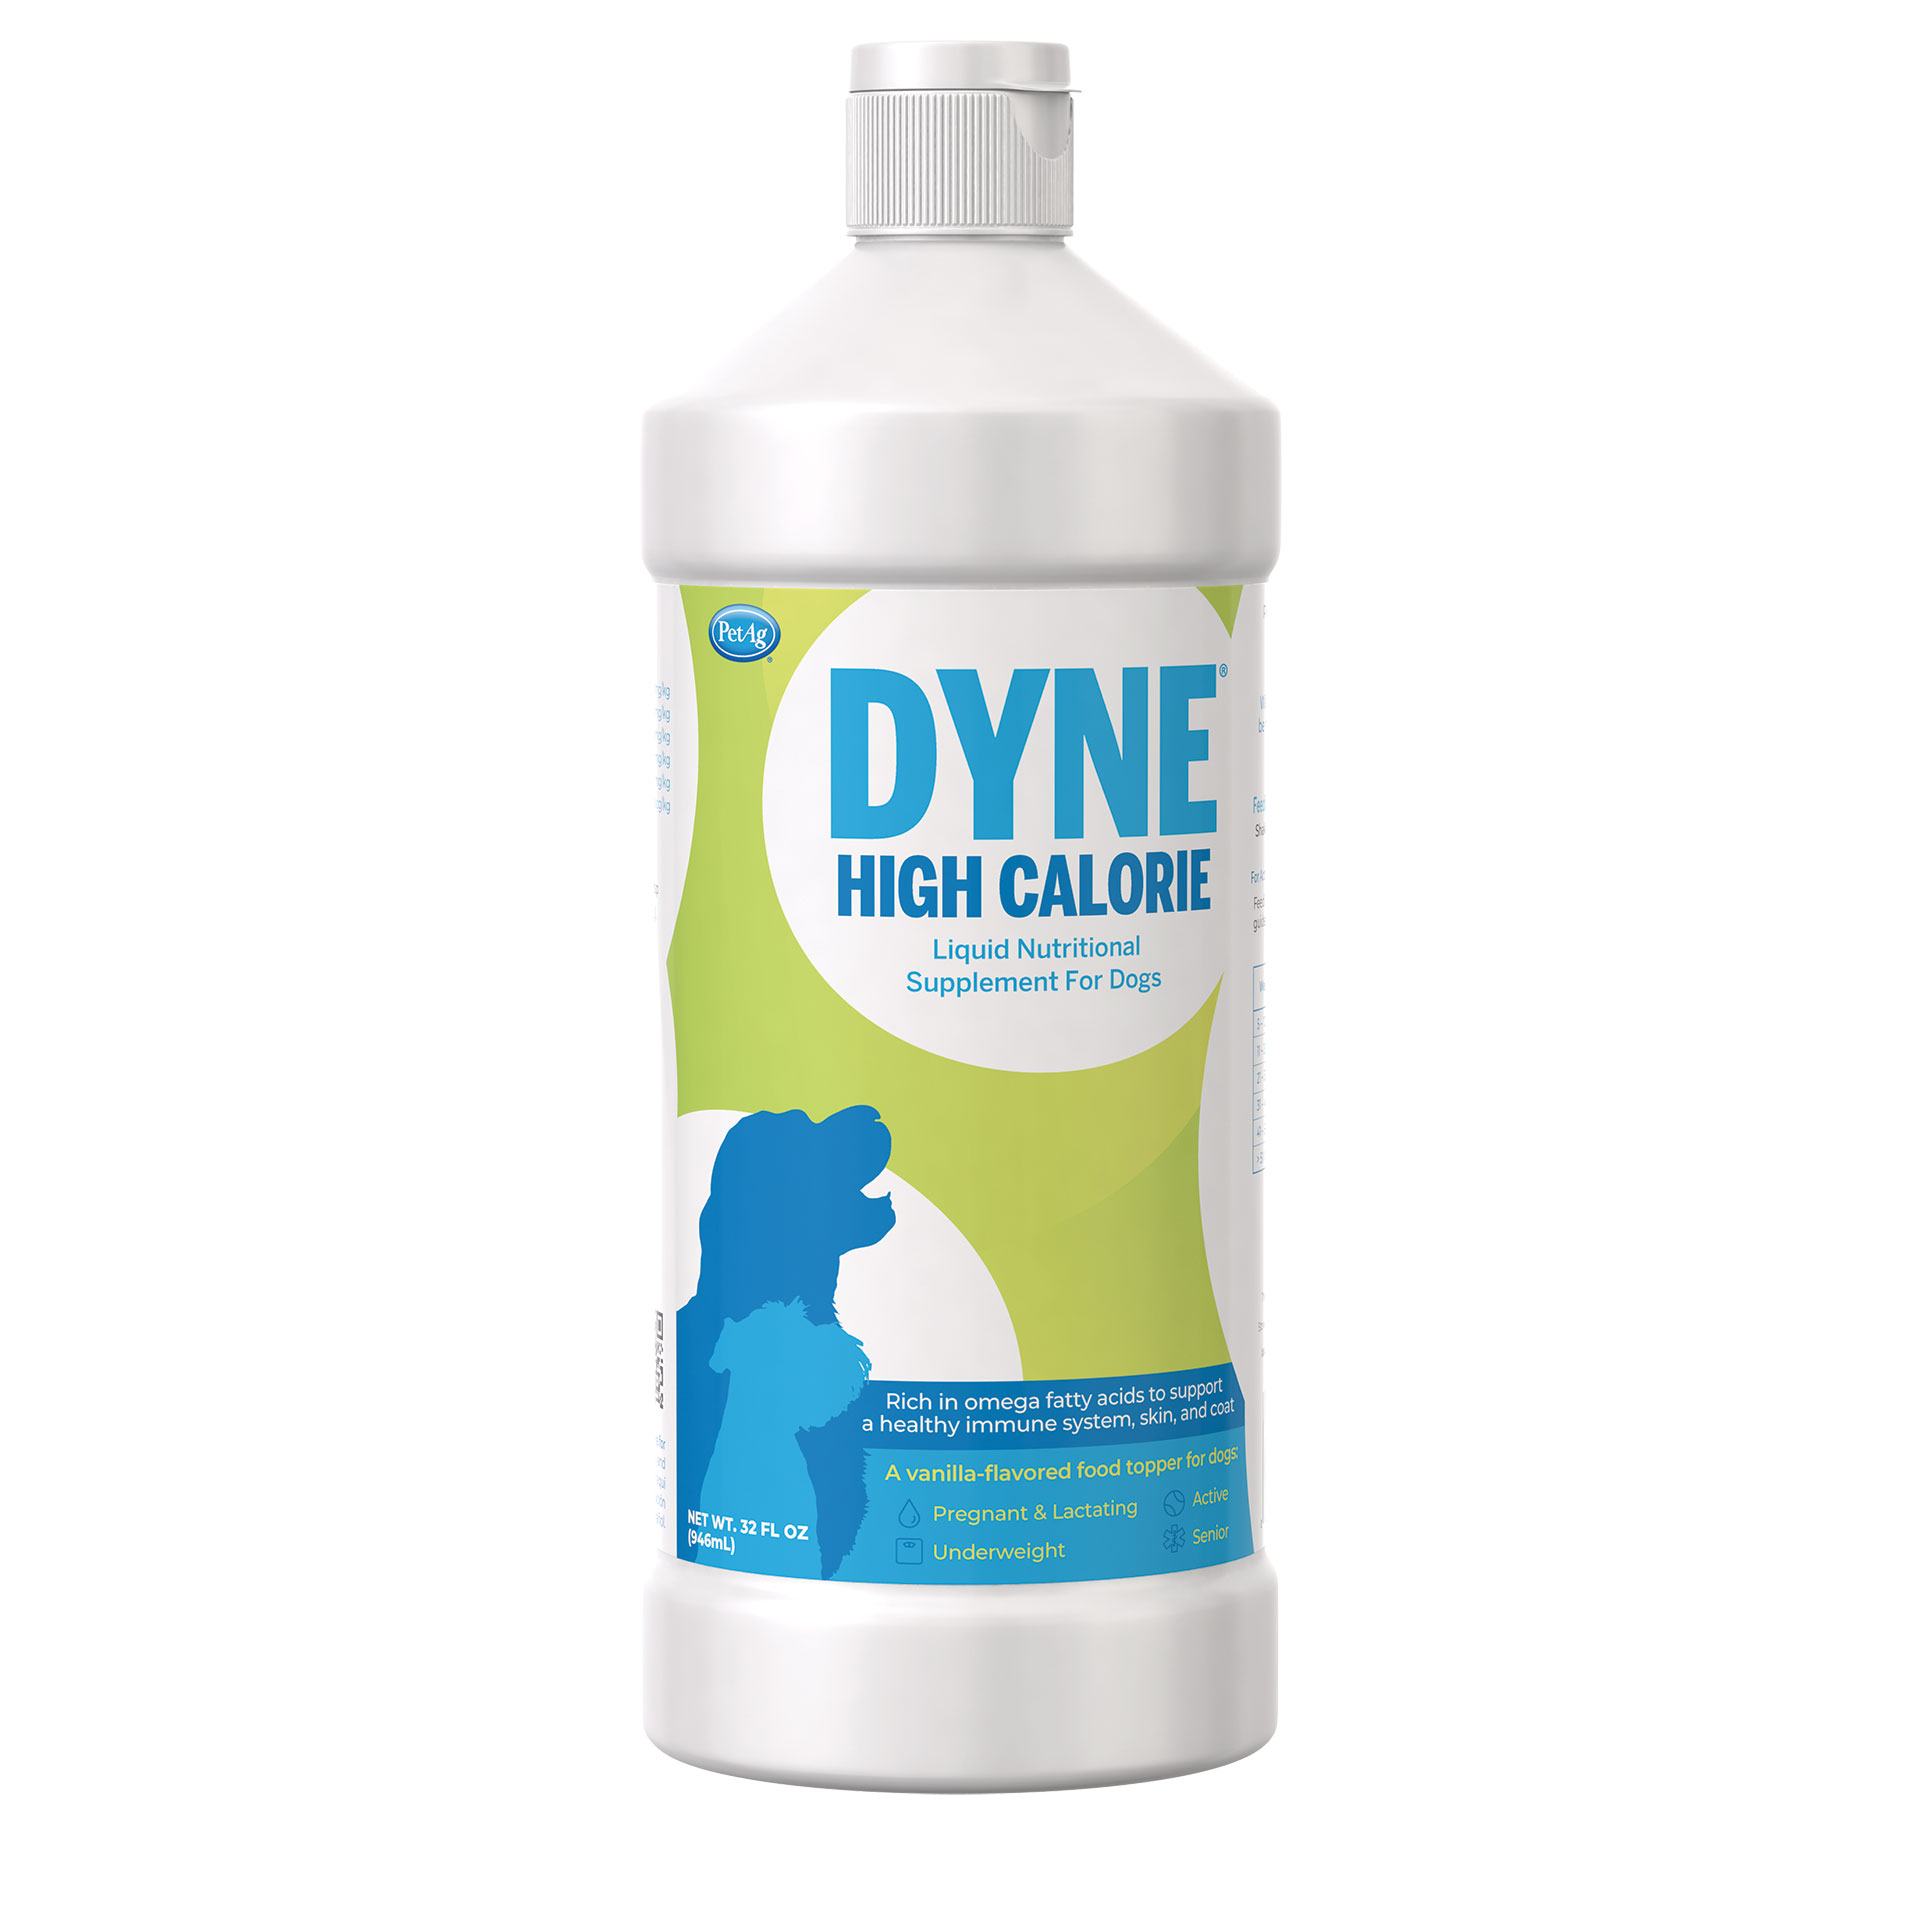 Dyne® Supplement for and Puppies Animal Health